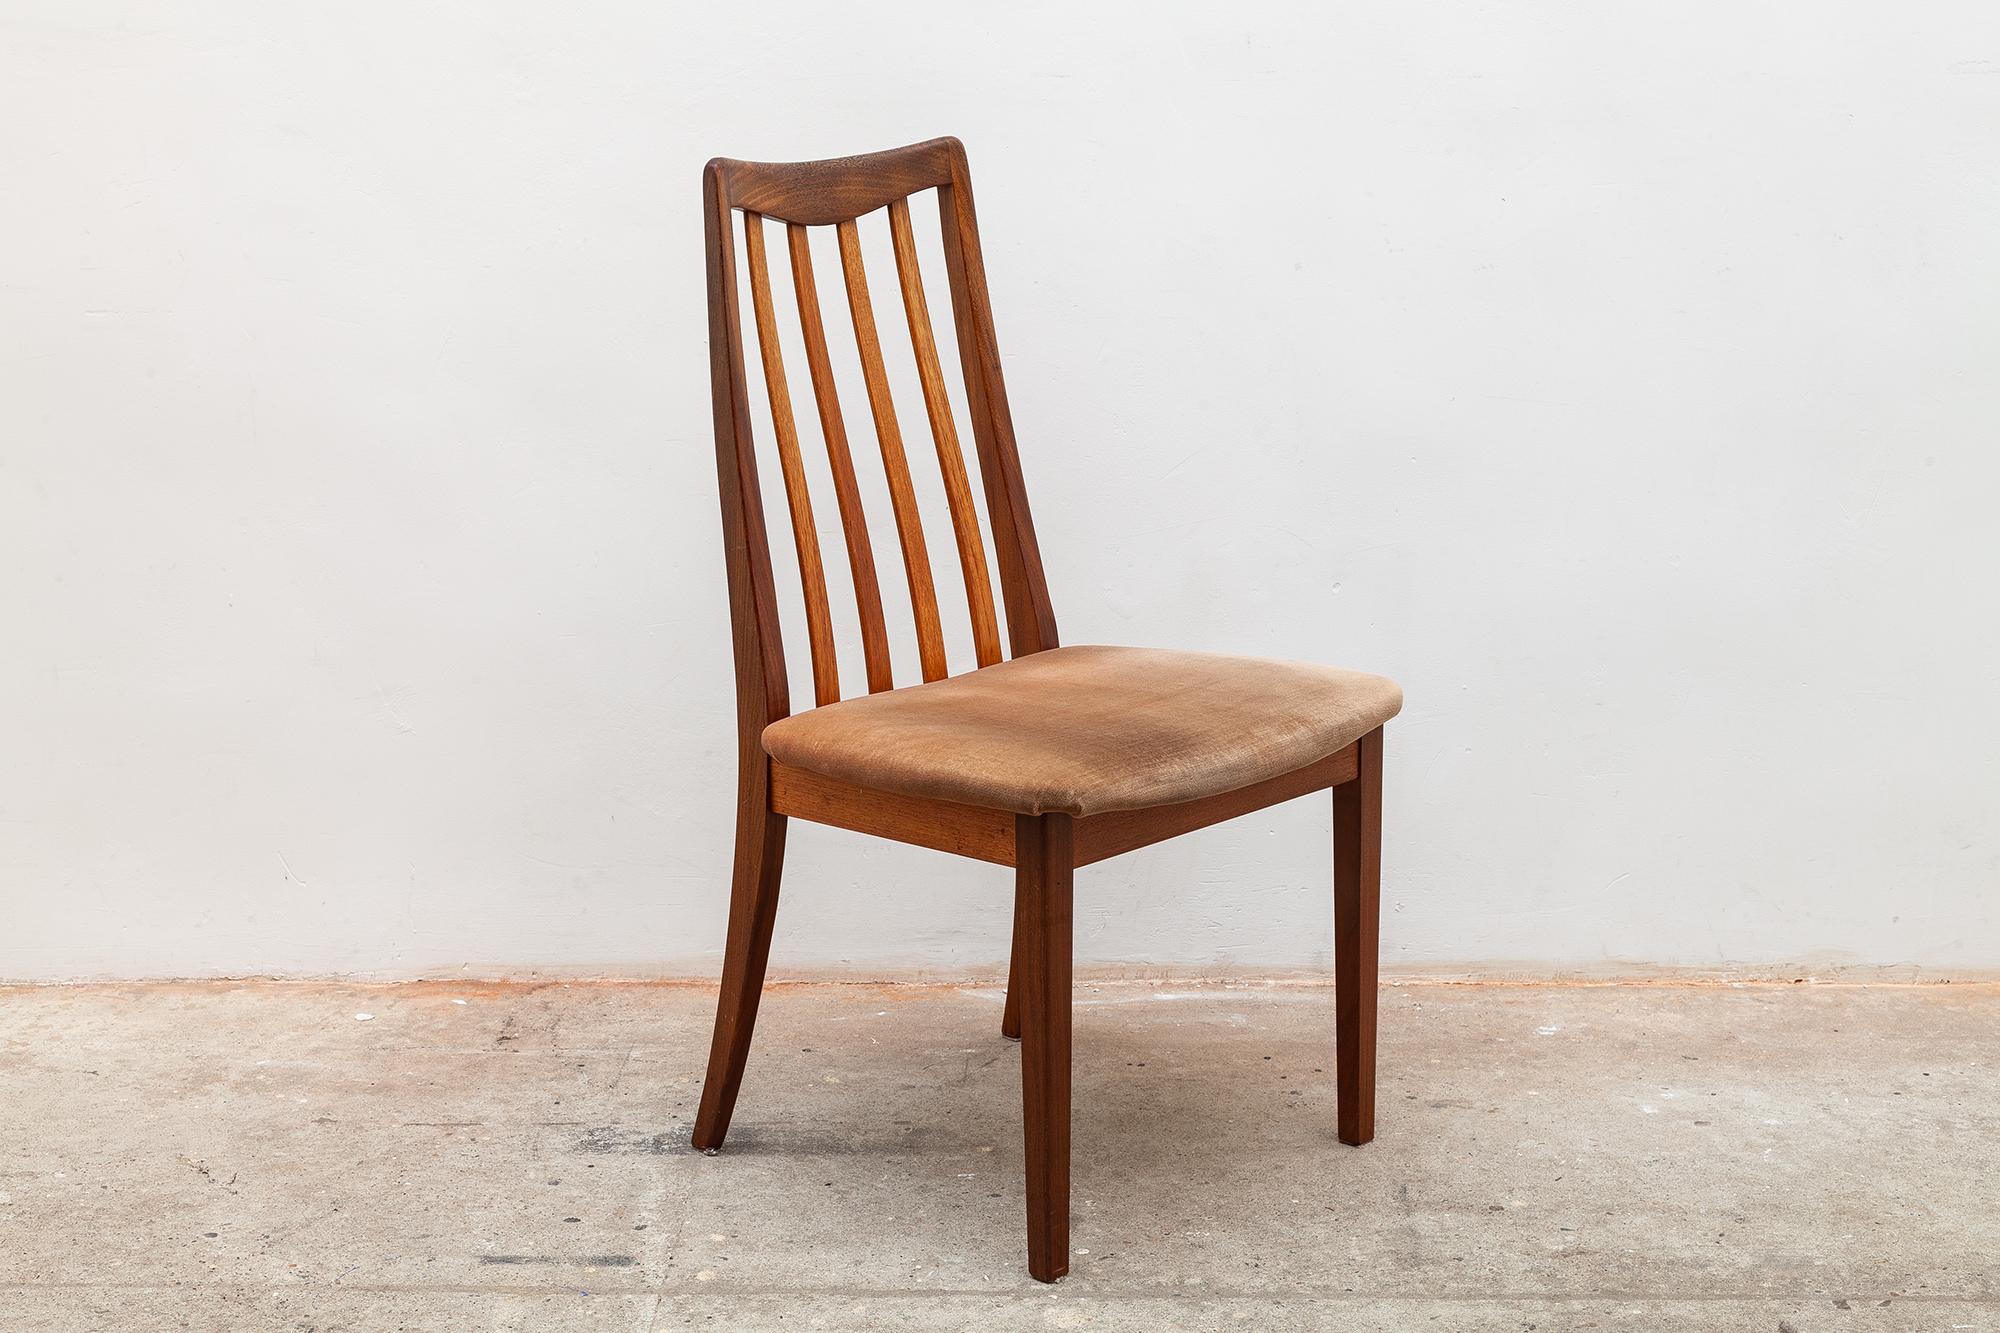 Beautiful set of six teak side chairs, model EVA designed by Niels Kofoed and manufactured by Hornslet Møbelfabrik, Denmark. Vintage comfortable wooden dining chair set in original peach velveteen upholstery. Four chairs without armrests and two